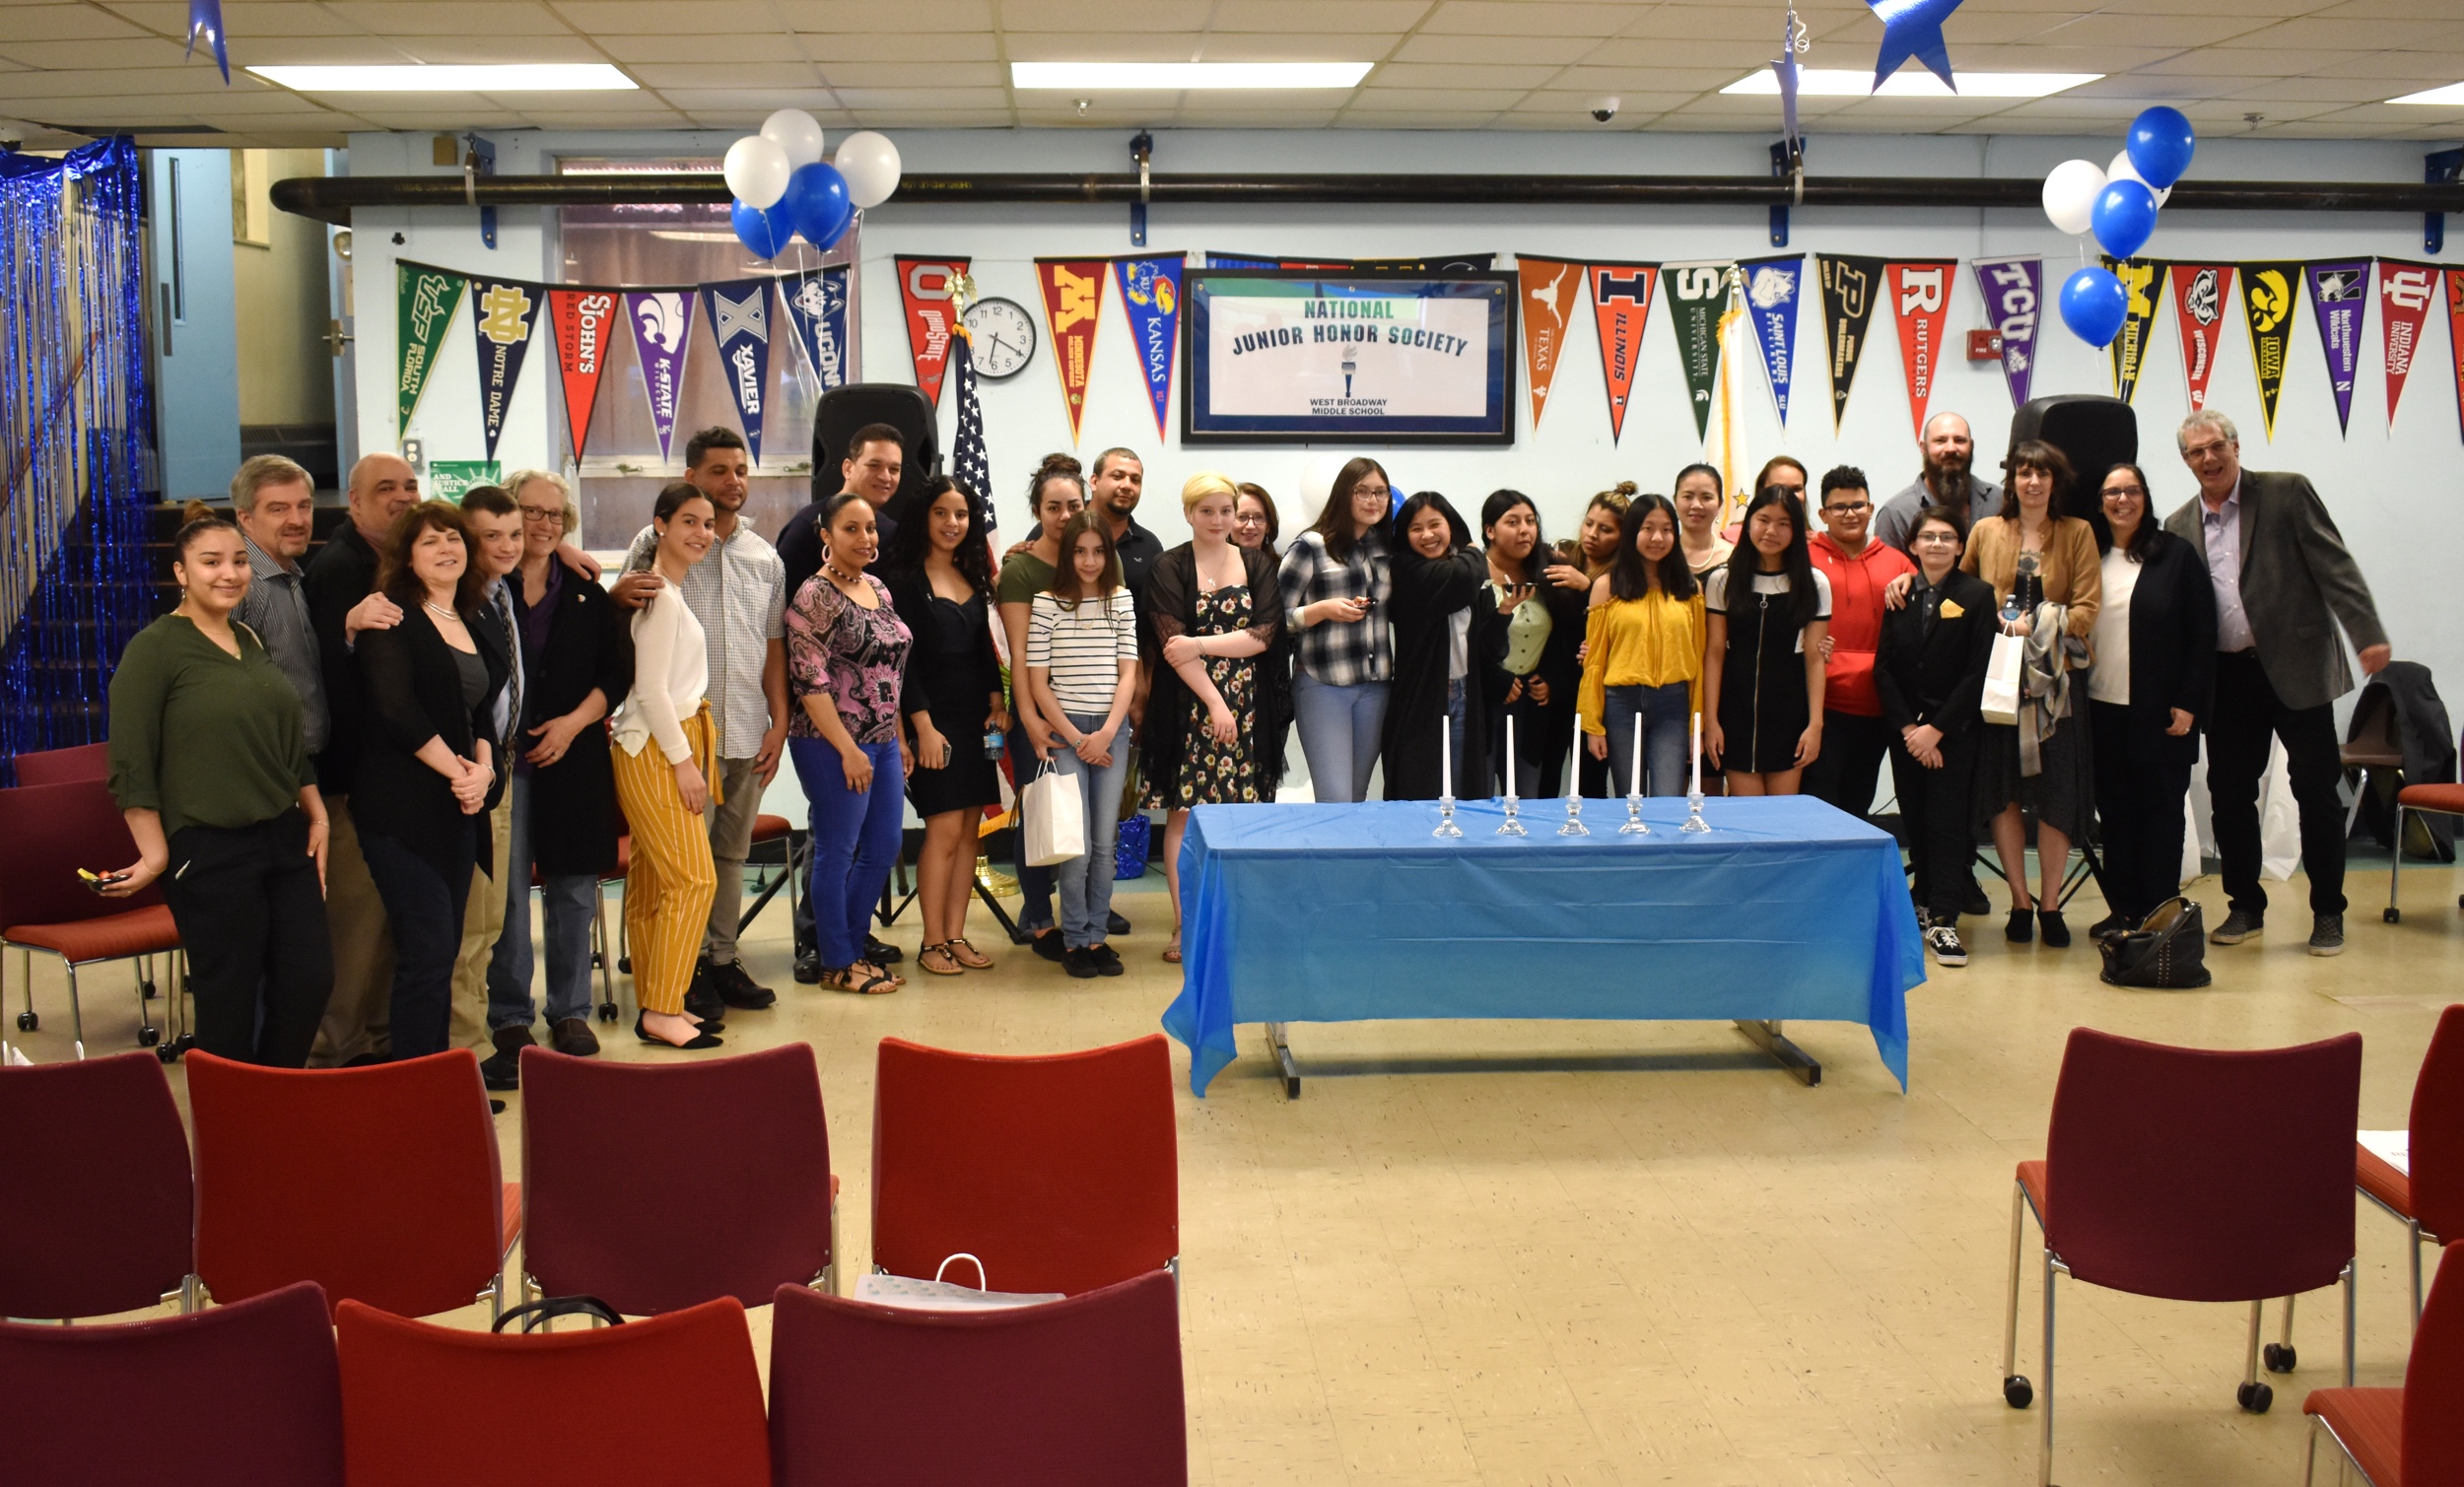  Proud students and families at West Broadway Middle School’s first NJHS Induction Ceremony 